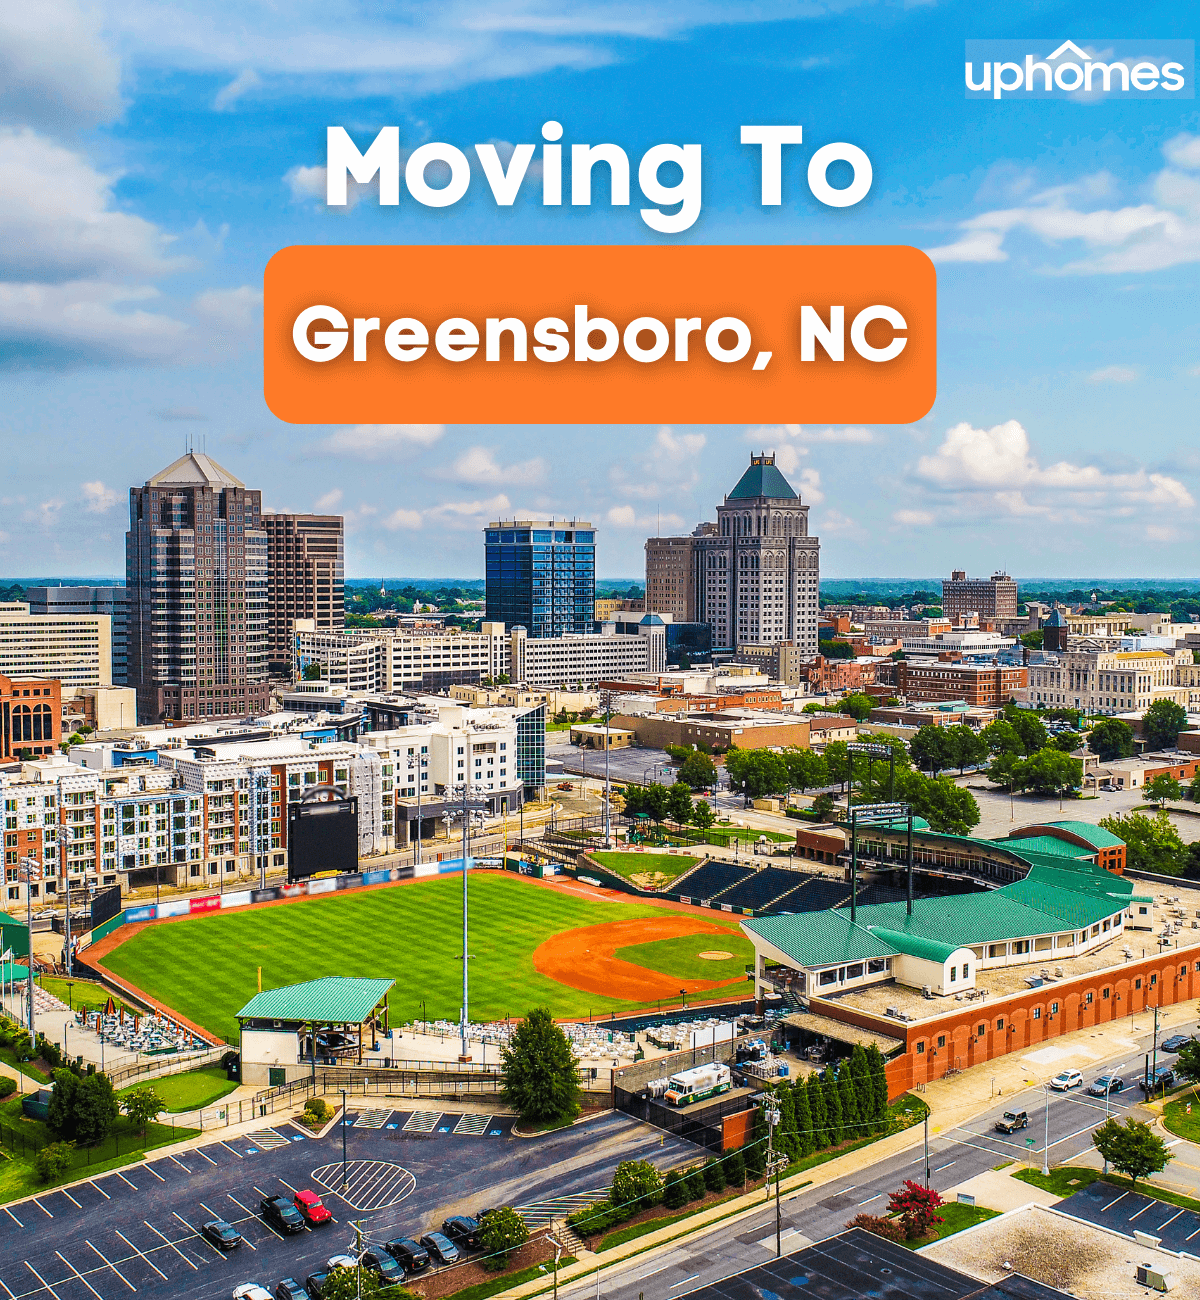 Moving to Greensboro, NC - What's it Like Living in Greenboro? Pros and cons!